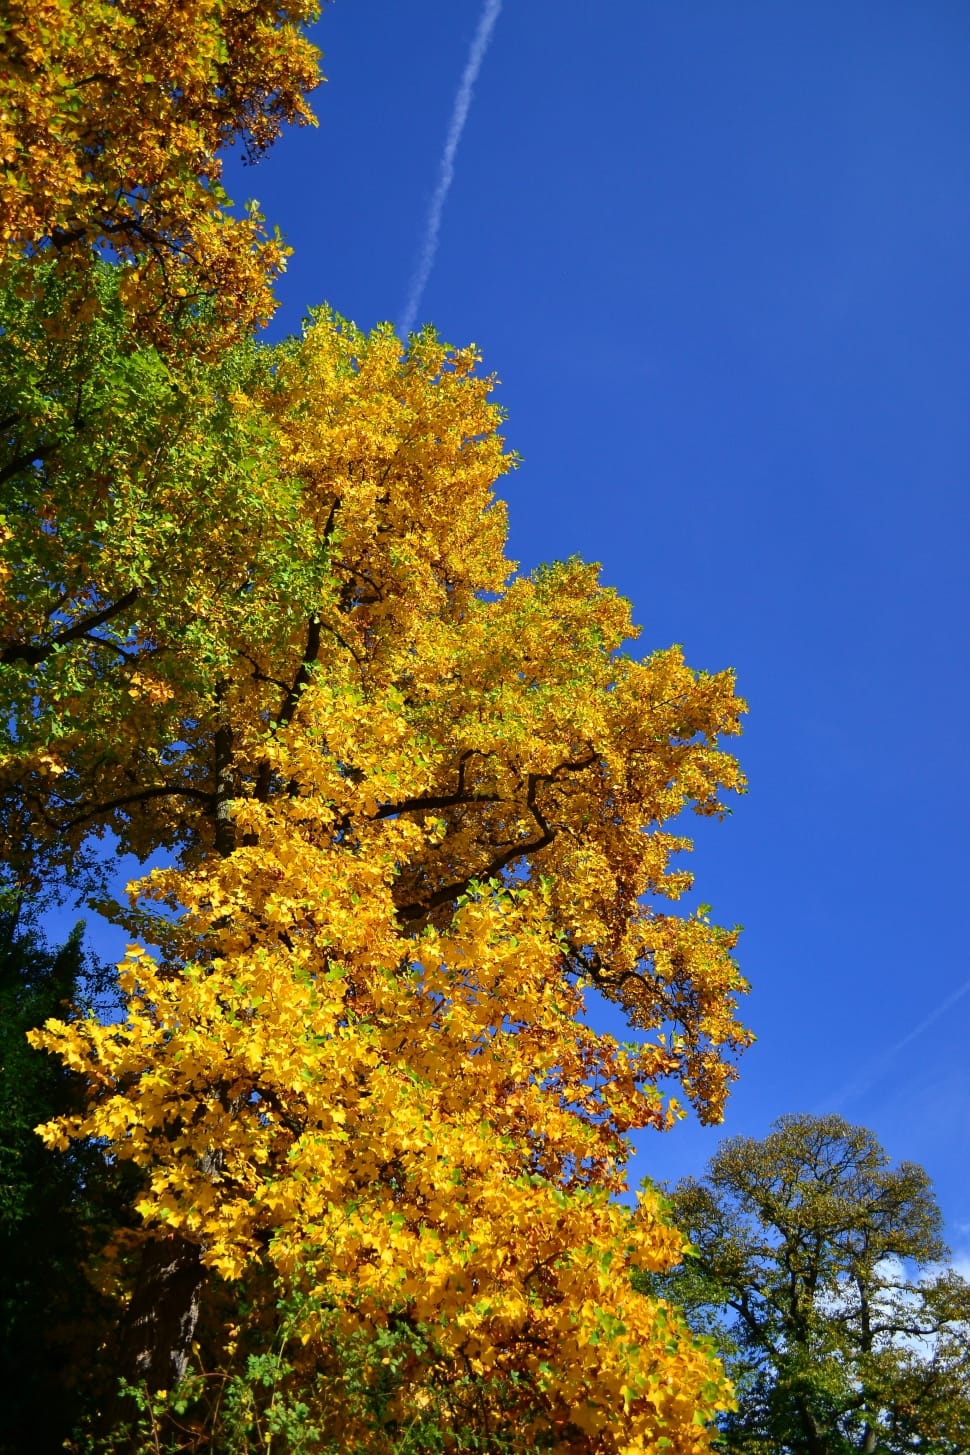 photography of yellow flowered tree under clear blue sky with white thin smoke preview